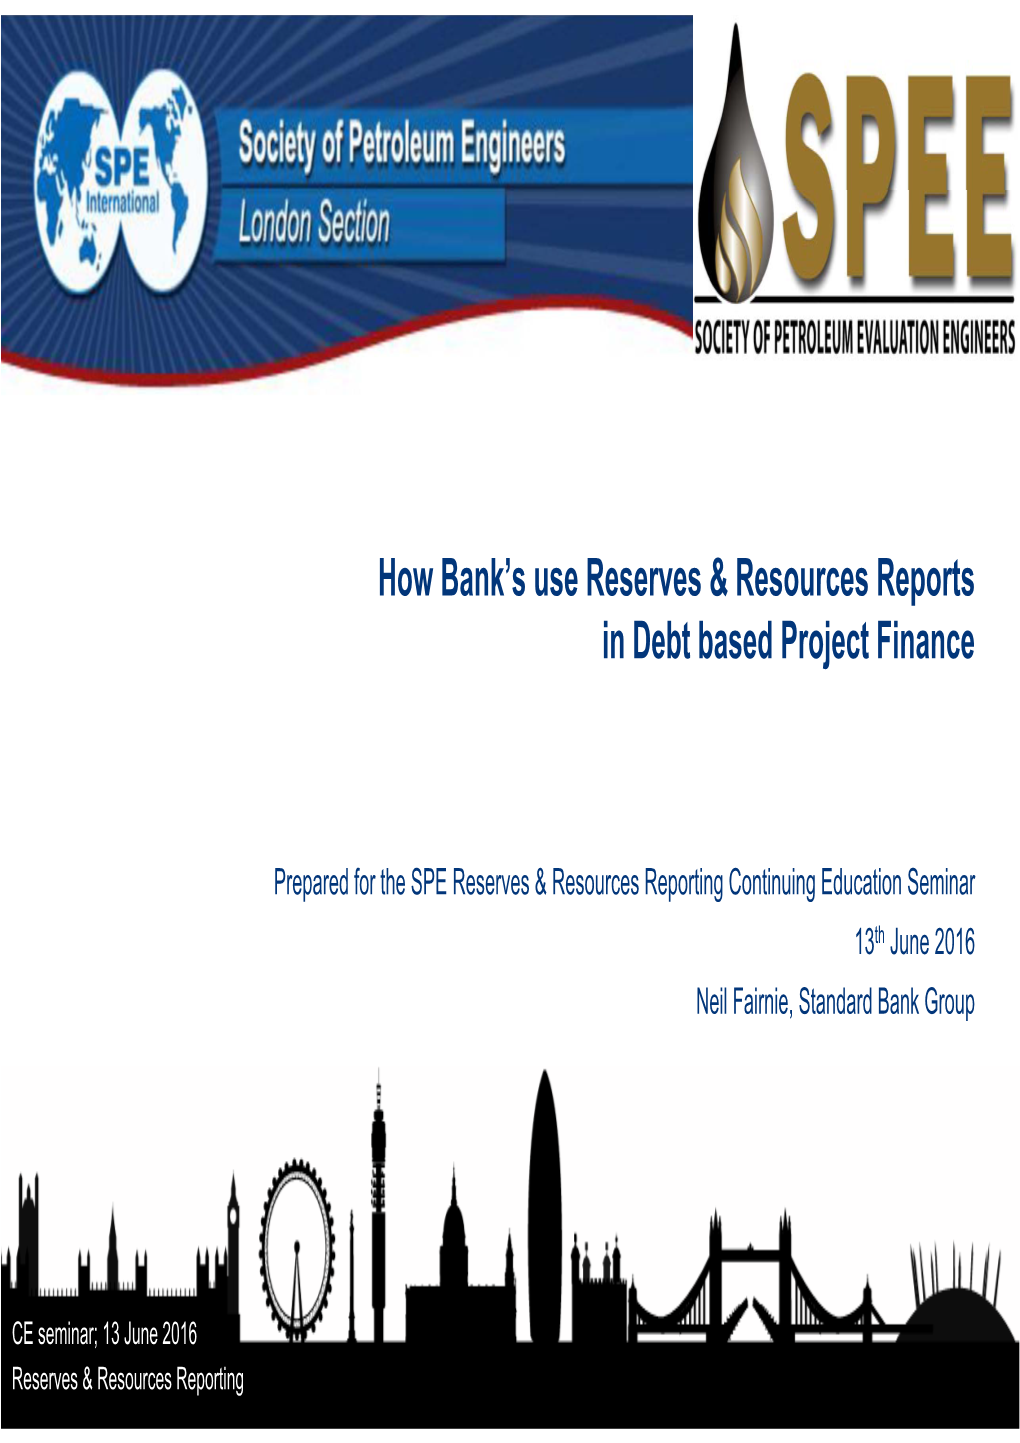 How Bank's Use Reserves & Resources Reports in Debt Based Project Finance